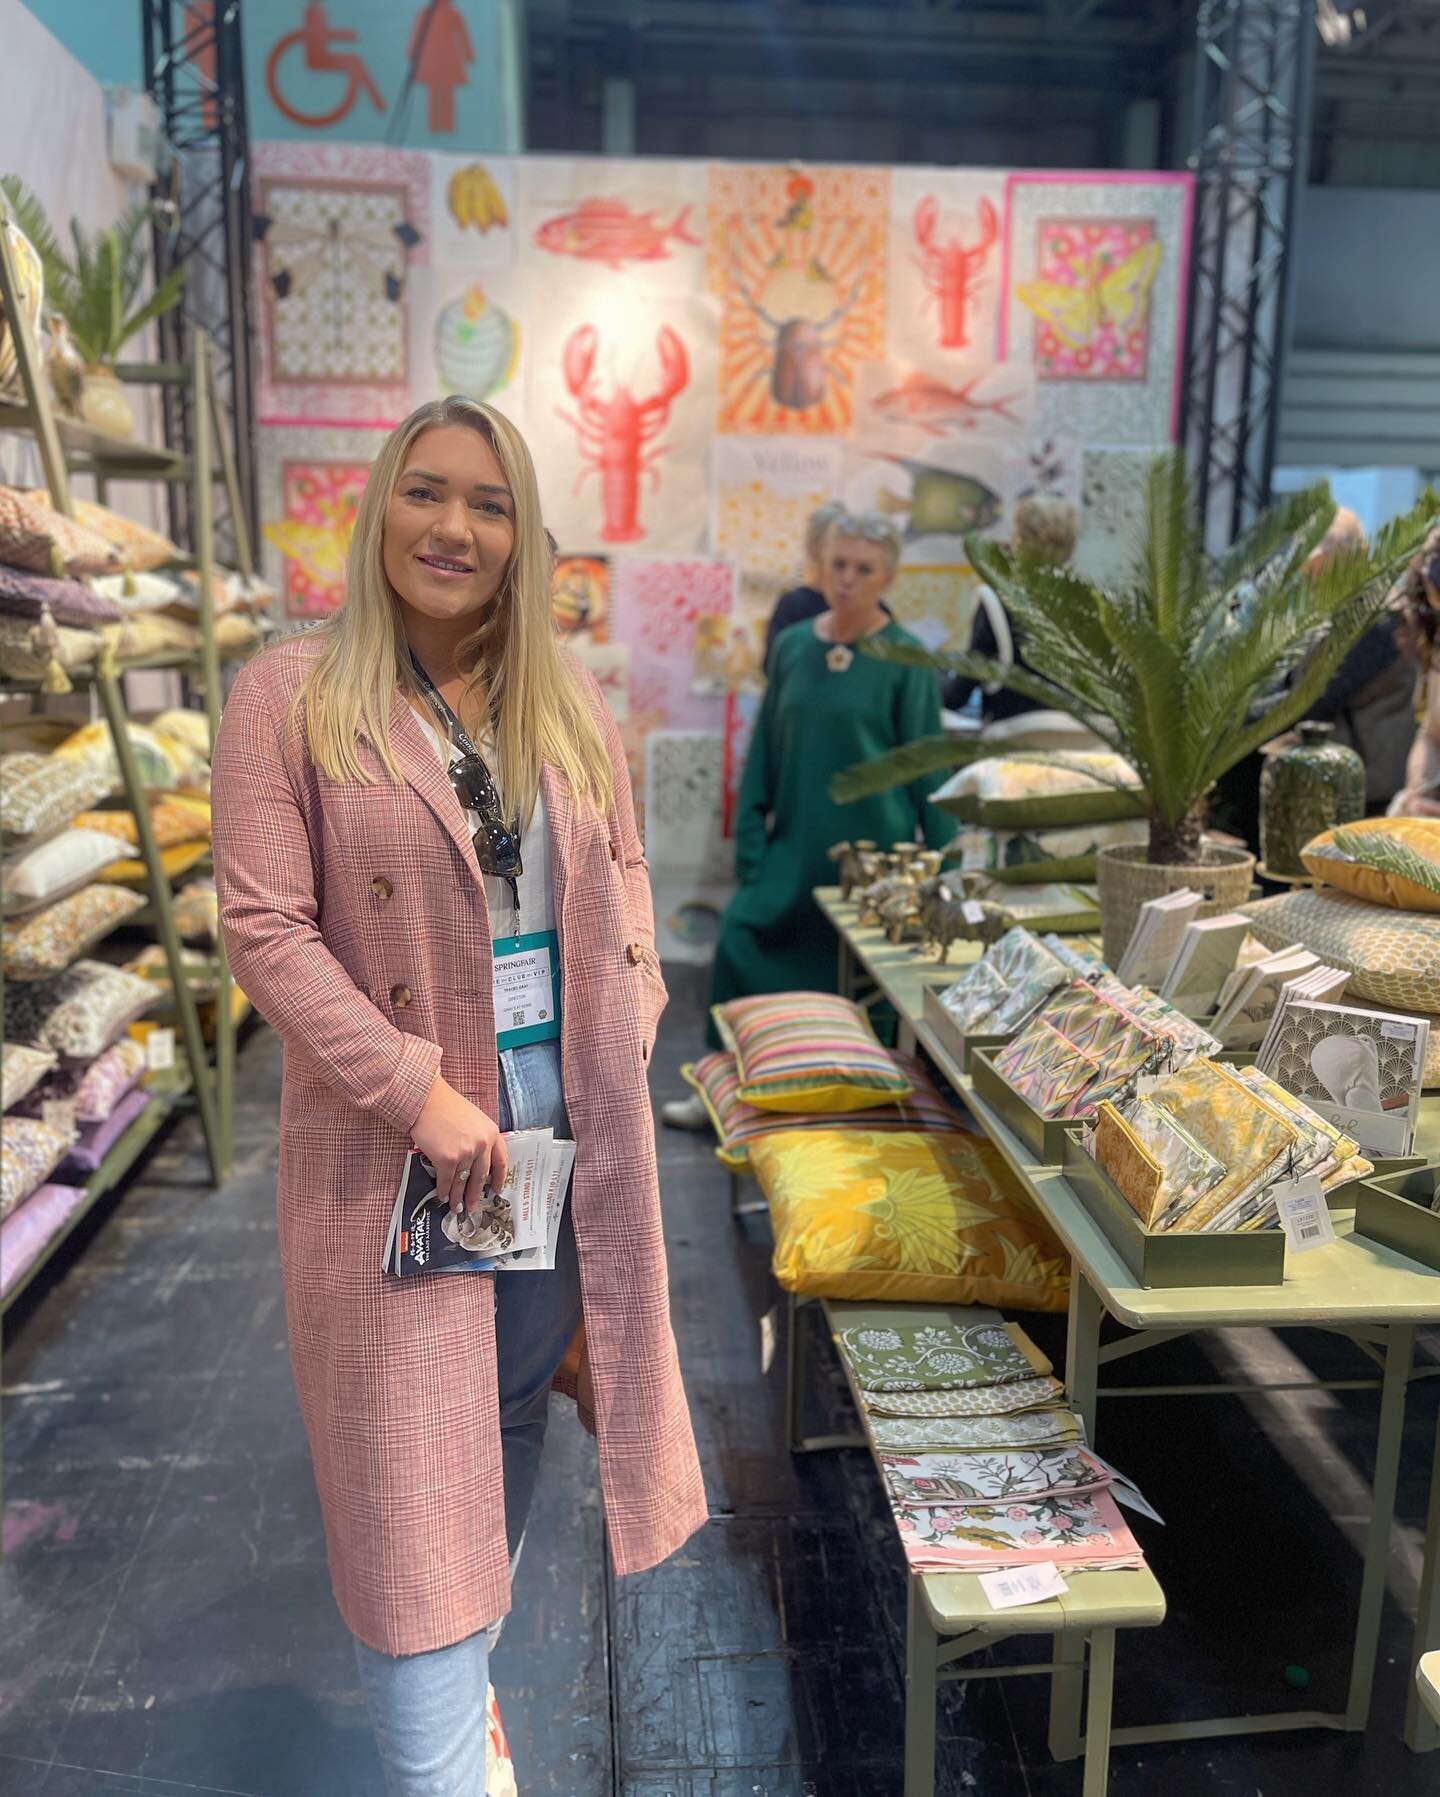 This stand was one of our favourites when visiting the Spring Fair earlier in the year 🦋 looking forward to receiving some new items 

#shoplocal #smallbusinessuk #supportsmallbusinesses #homeinterior #homefurnishings #spring #springfair2023 #textil